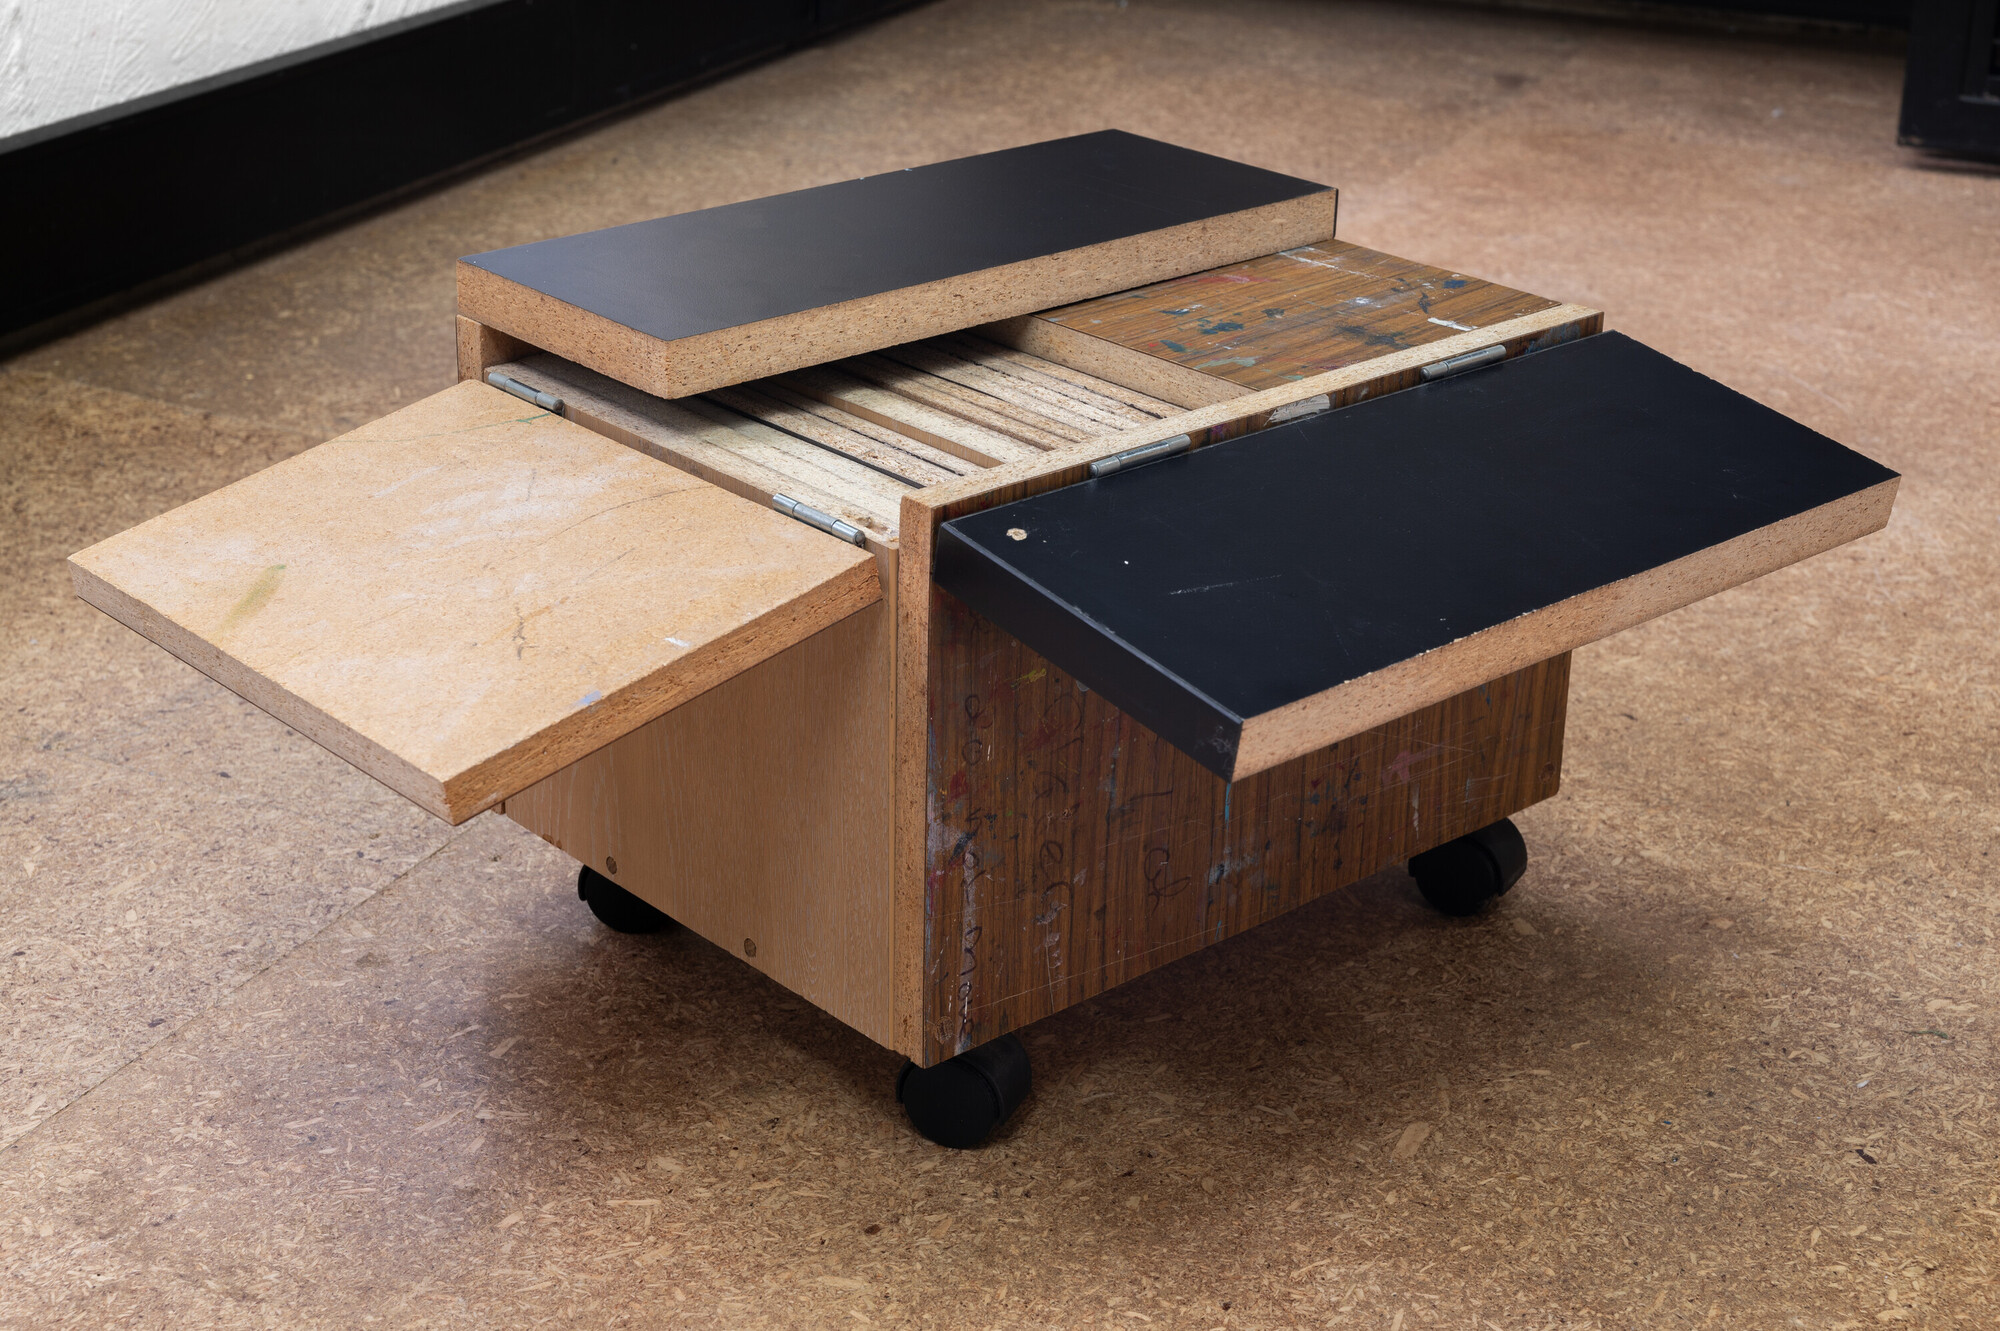 <p>Yusi Zang, <em>A Wooden Box Filled with Wood, </em>2016, school tables, hinges, dowel joints 40 x 32 x 32 cm. Photograph: Tommaso Nervegna-Reed. Image courtesy of the artist and Cache.</p>